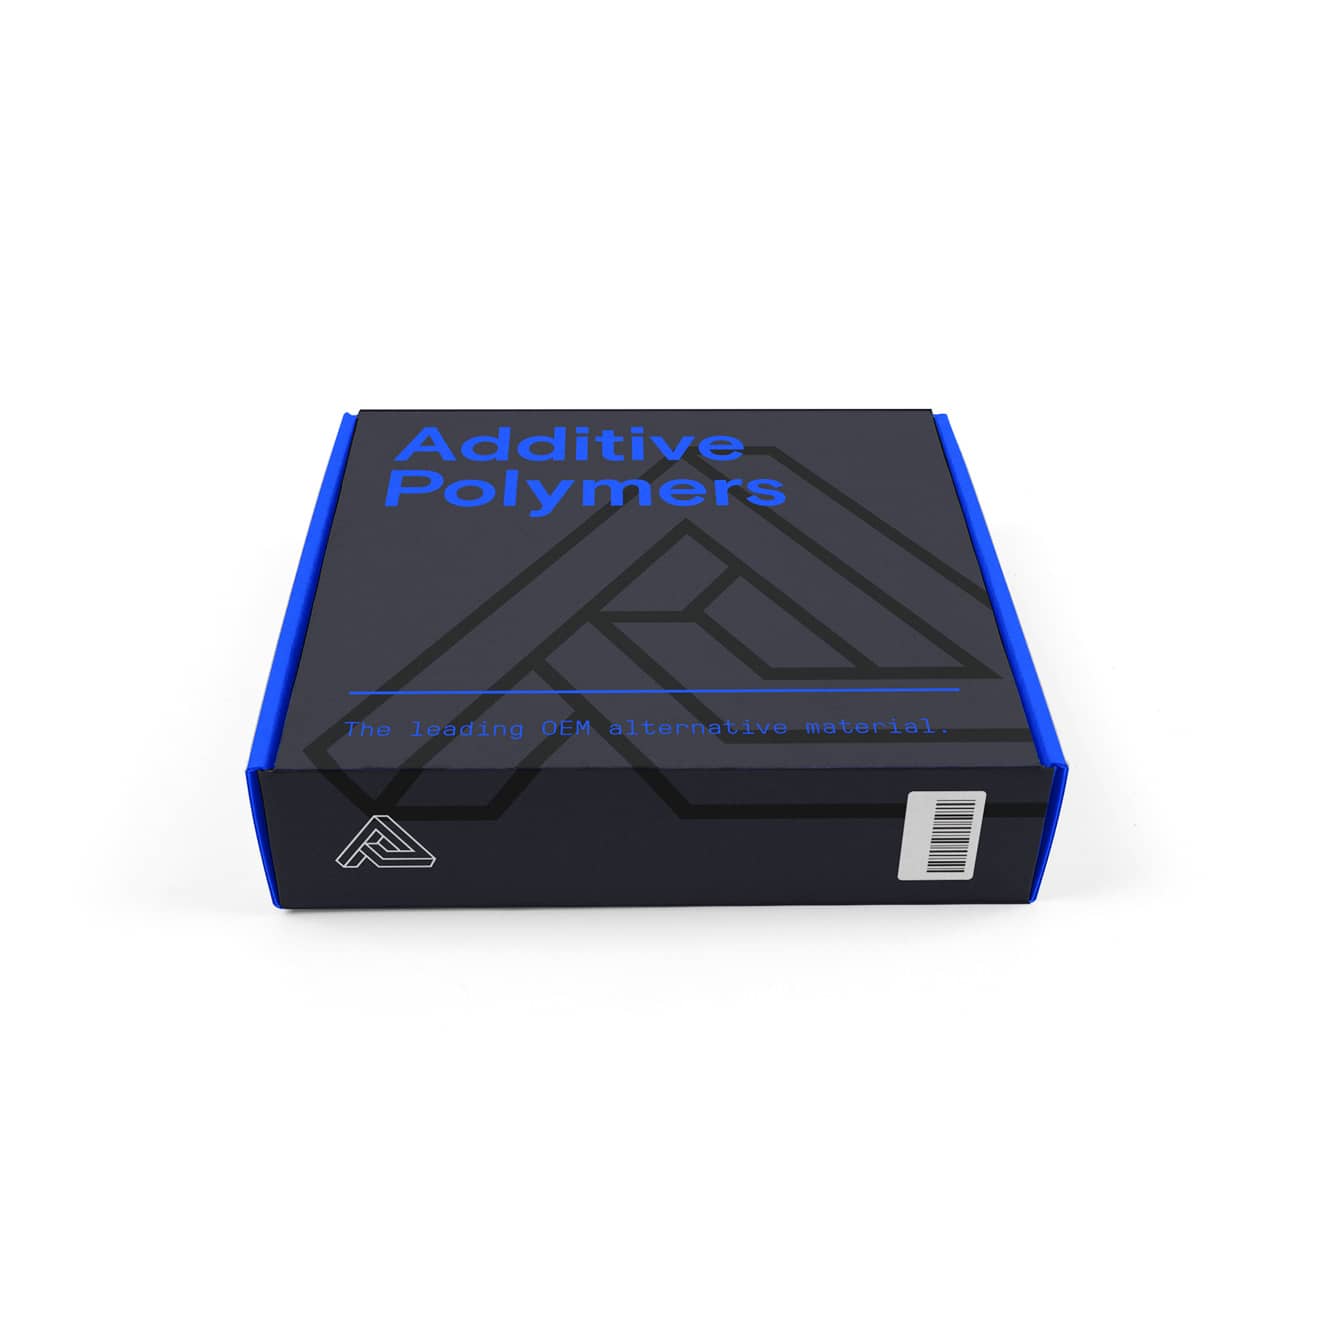 Bright blue and black box packaging for an Additive Polymers spool